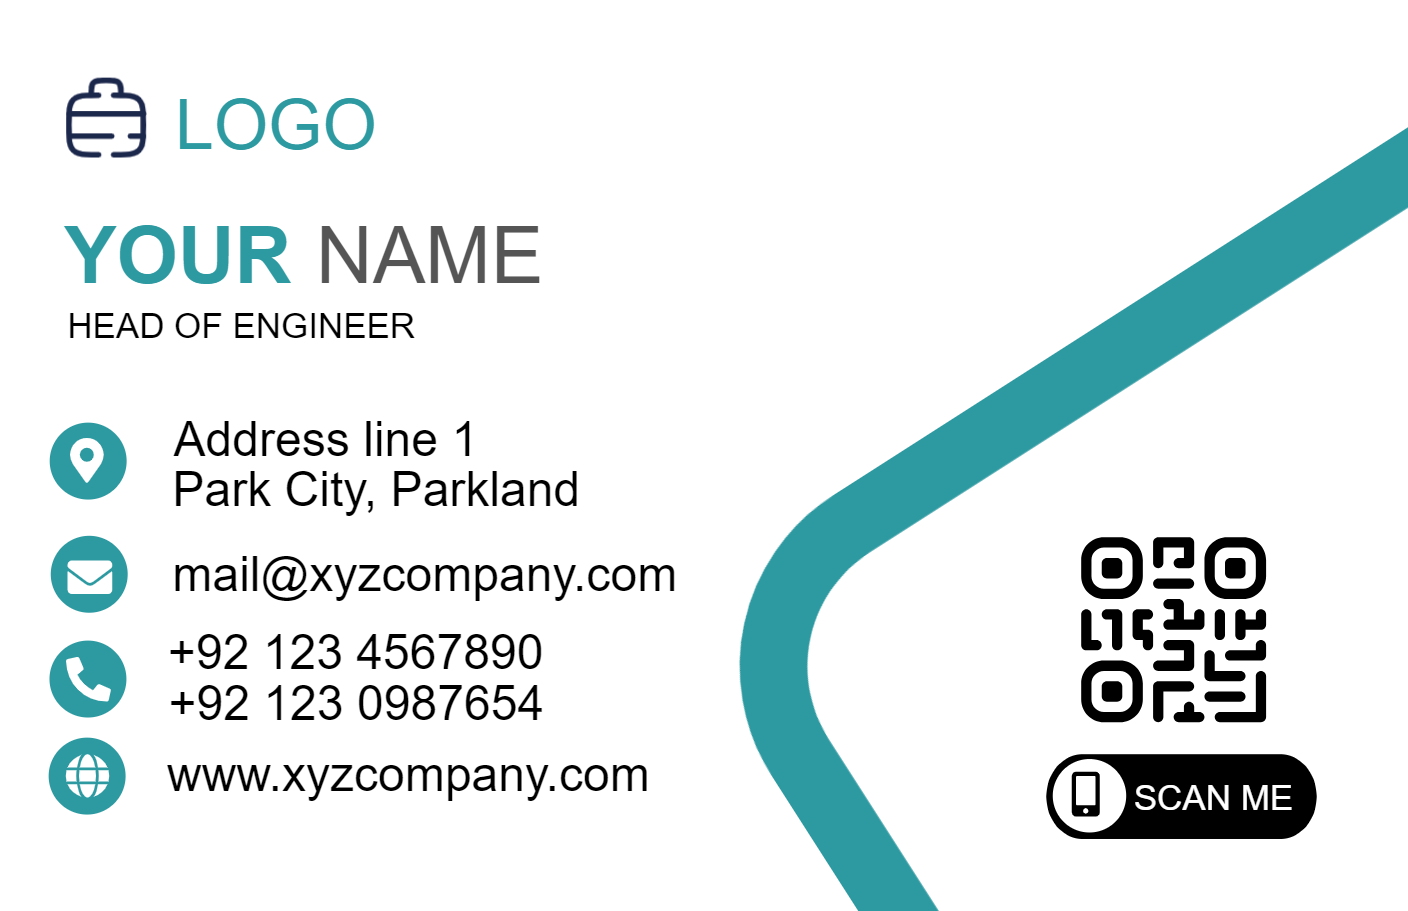 Keppel and white business card template, Keppel and white card. Keppel and white card